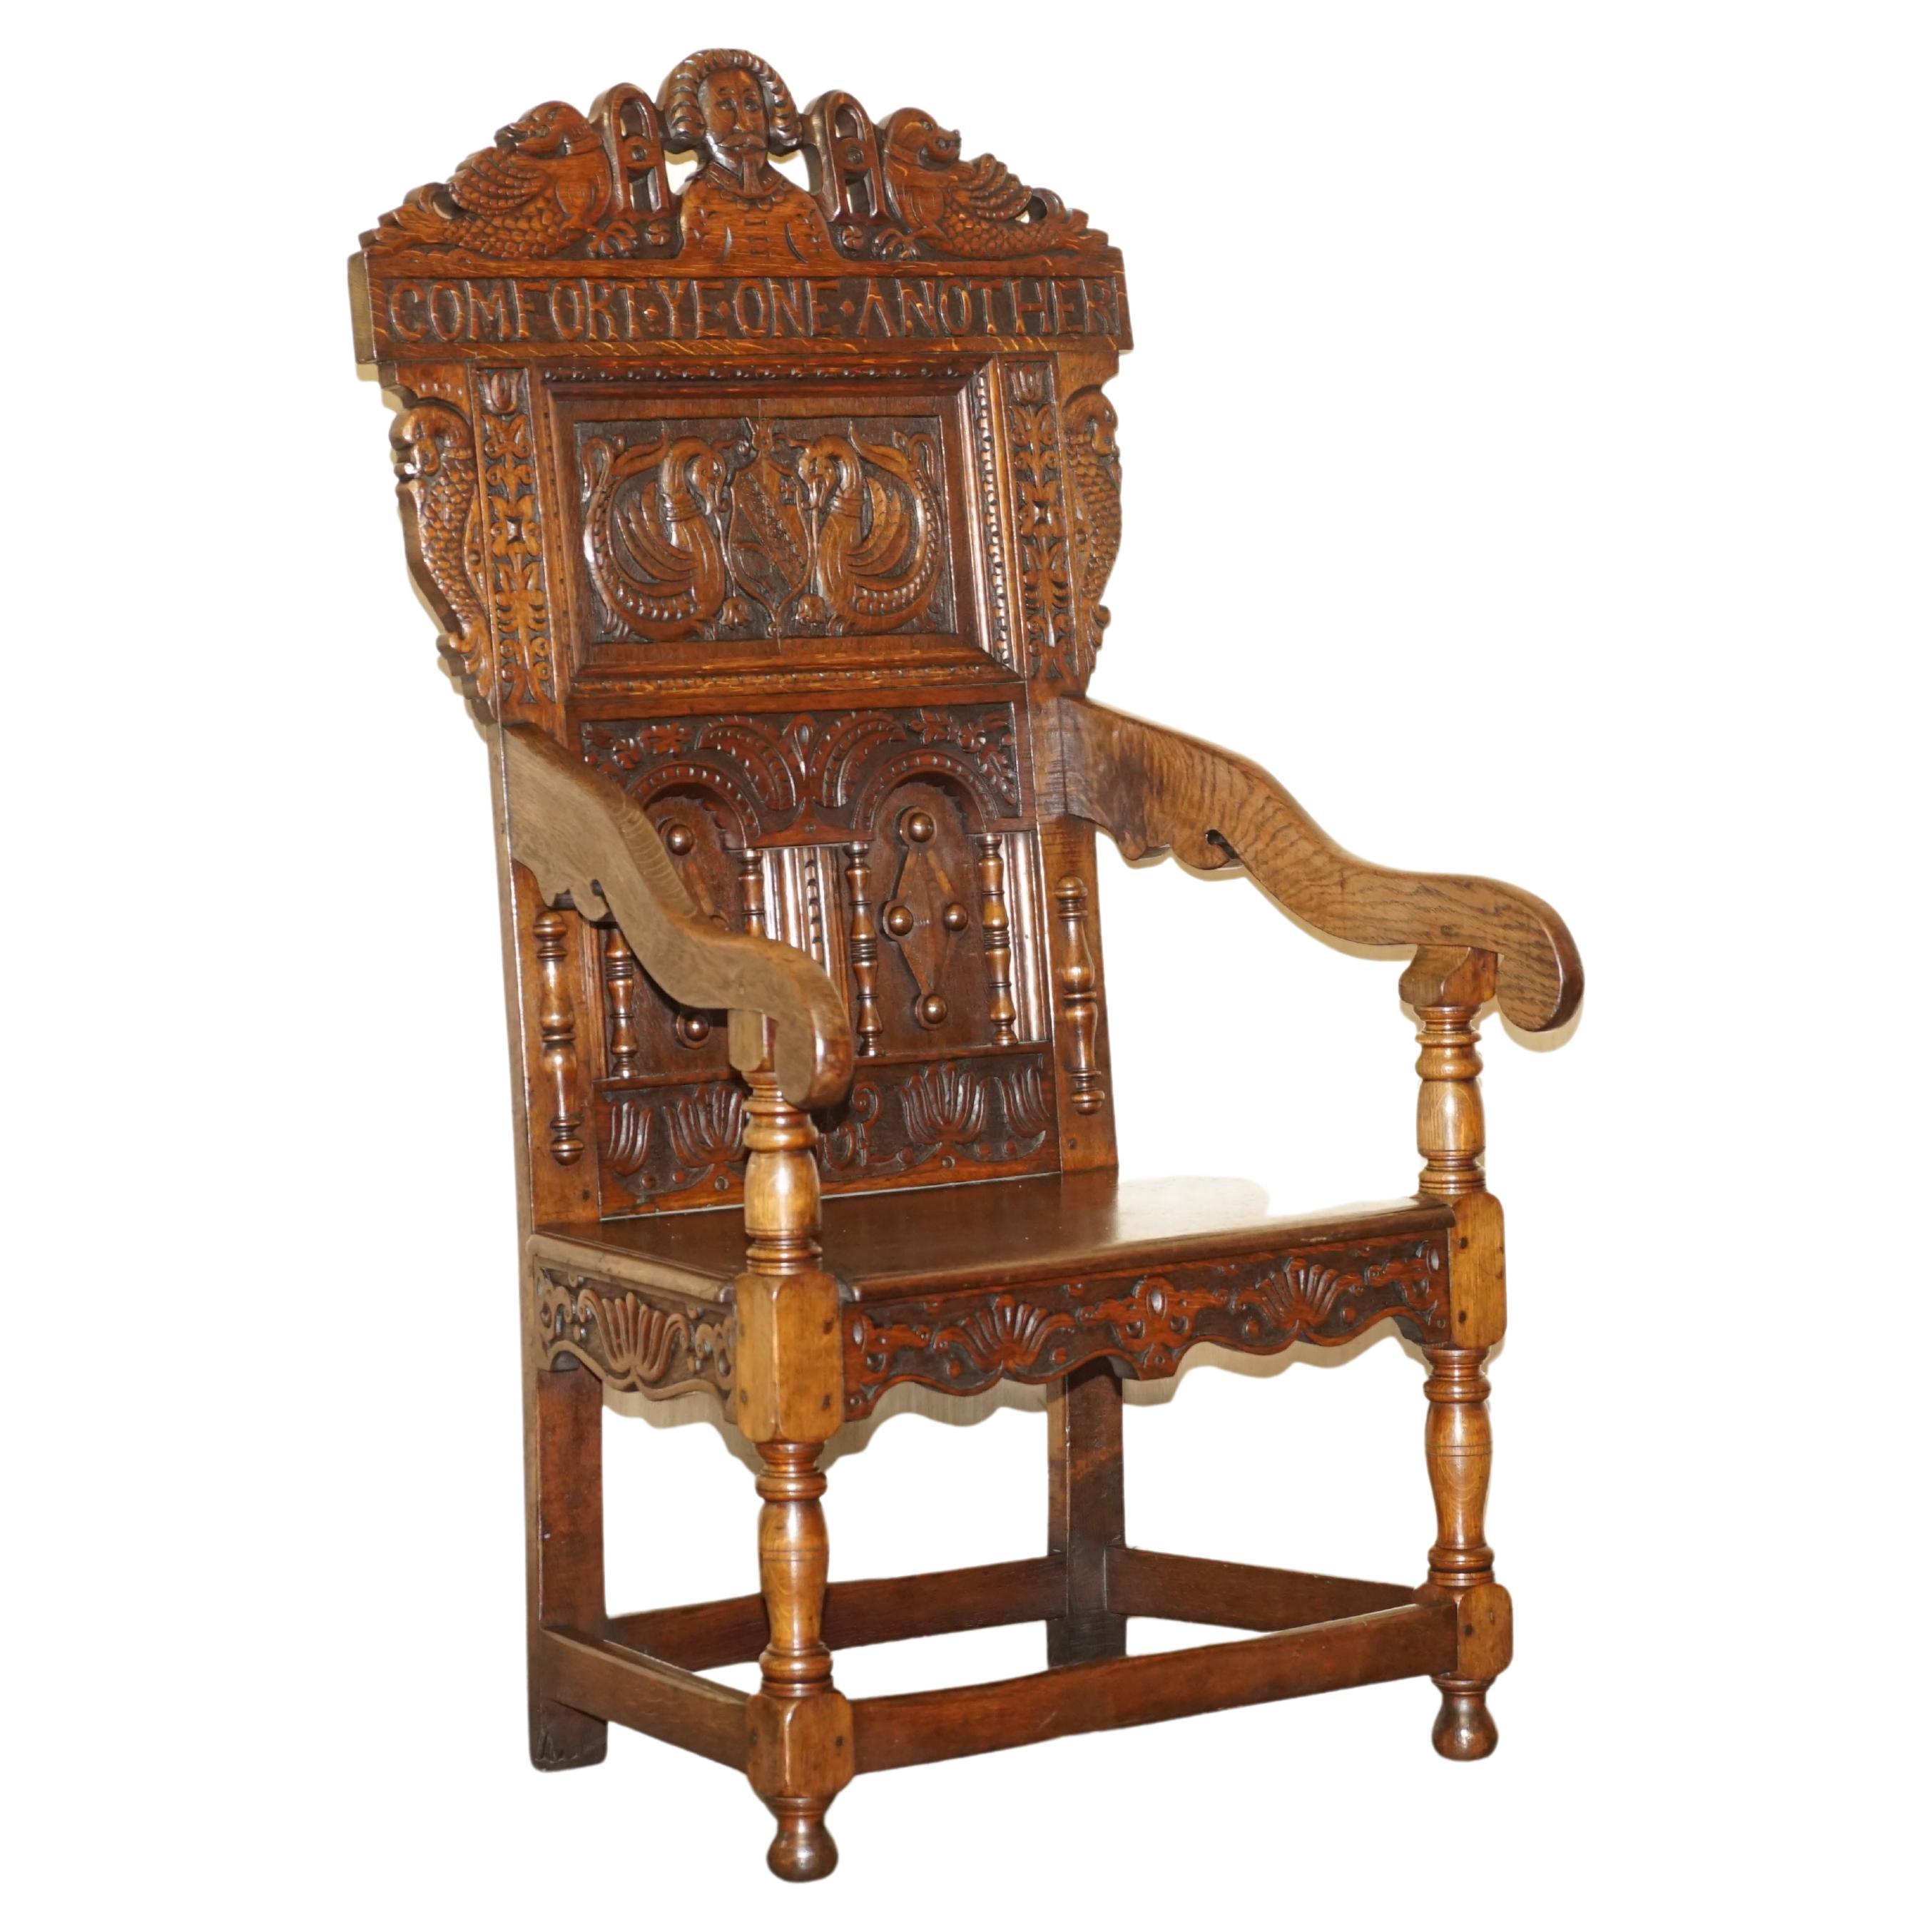 ANTiQUE ENGLISH 1662 DATED COMFORT ONE ANOTHER CARVED WAINSCOTT THRONE ARMCHAIR For Sale